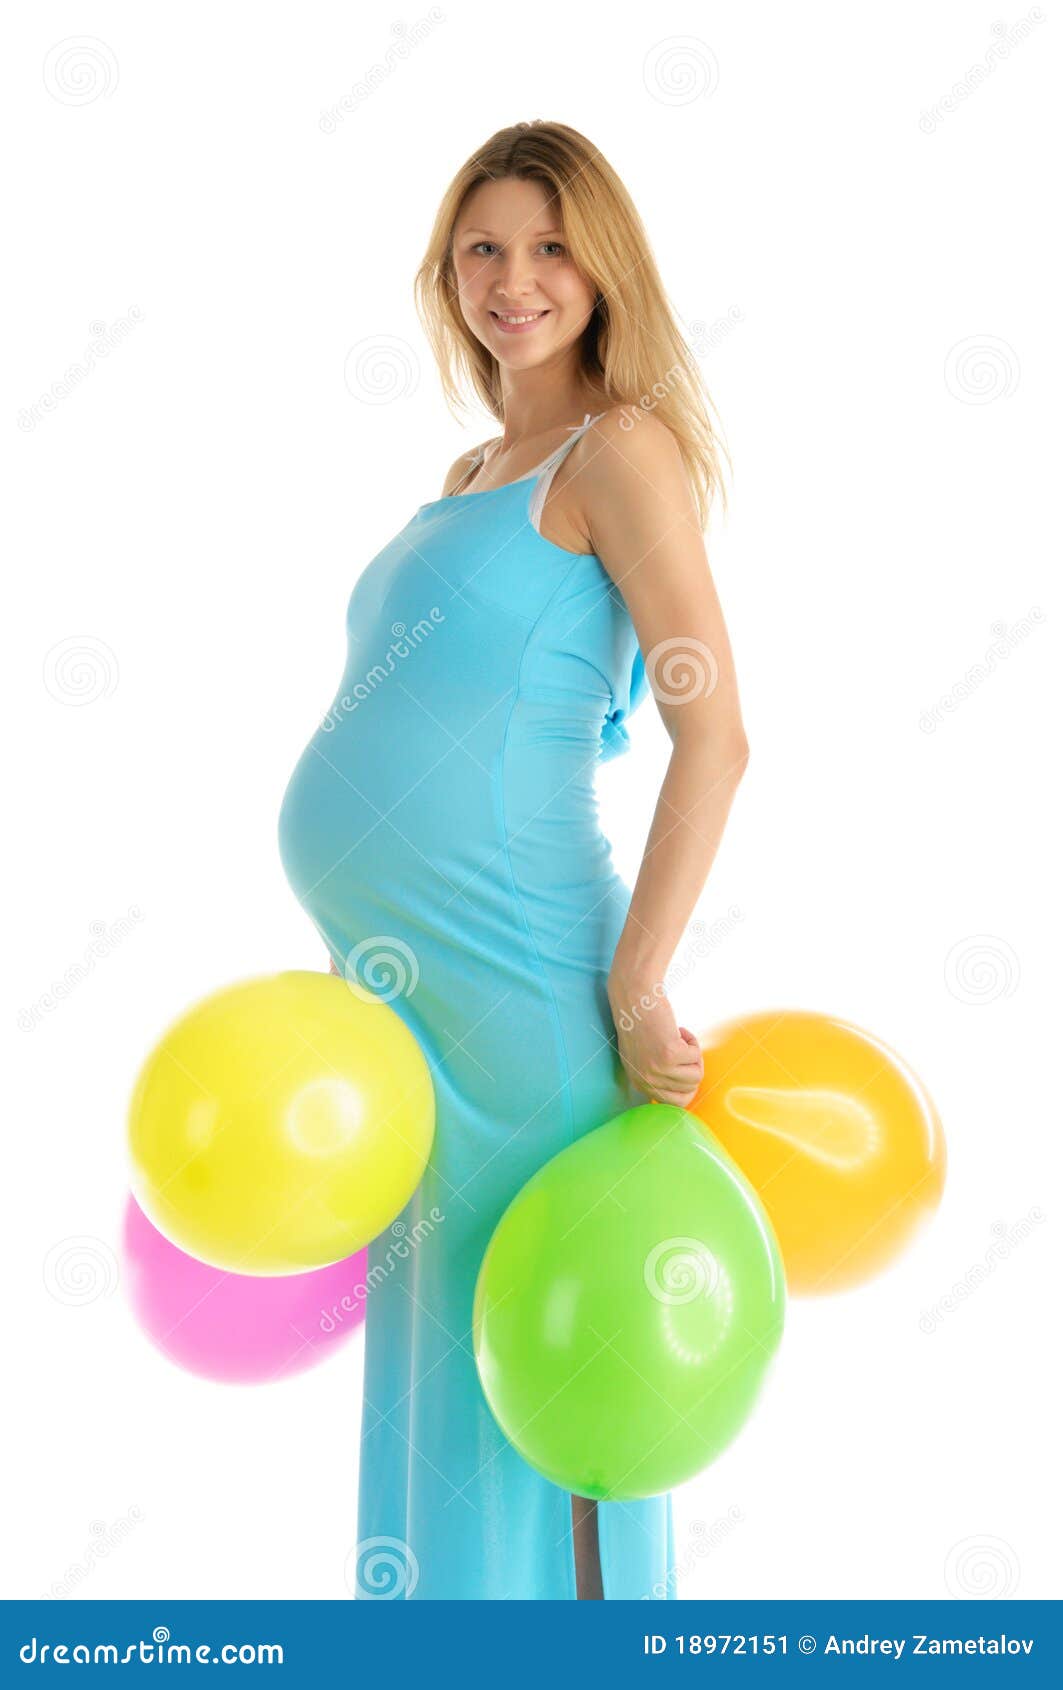 Pregnant Woman With Balloons Stock Image Image Of Isolated Female 18972151